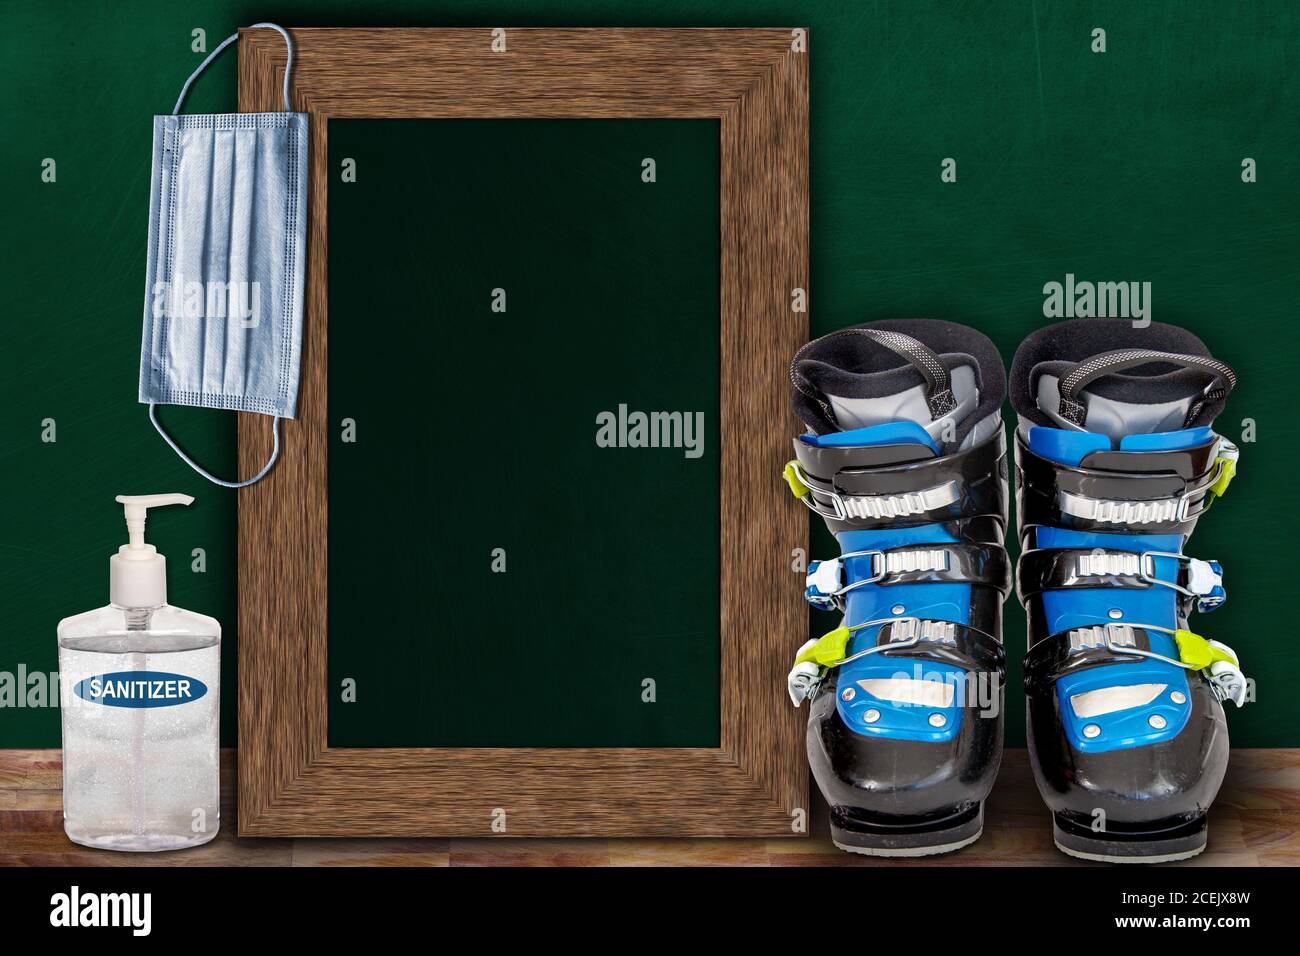 COVID-19 new normal sports concept in a classroom setting showing framed chalkboard with copy space and a pair of ski boots on wooden table. Stock Photo